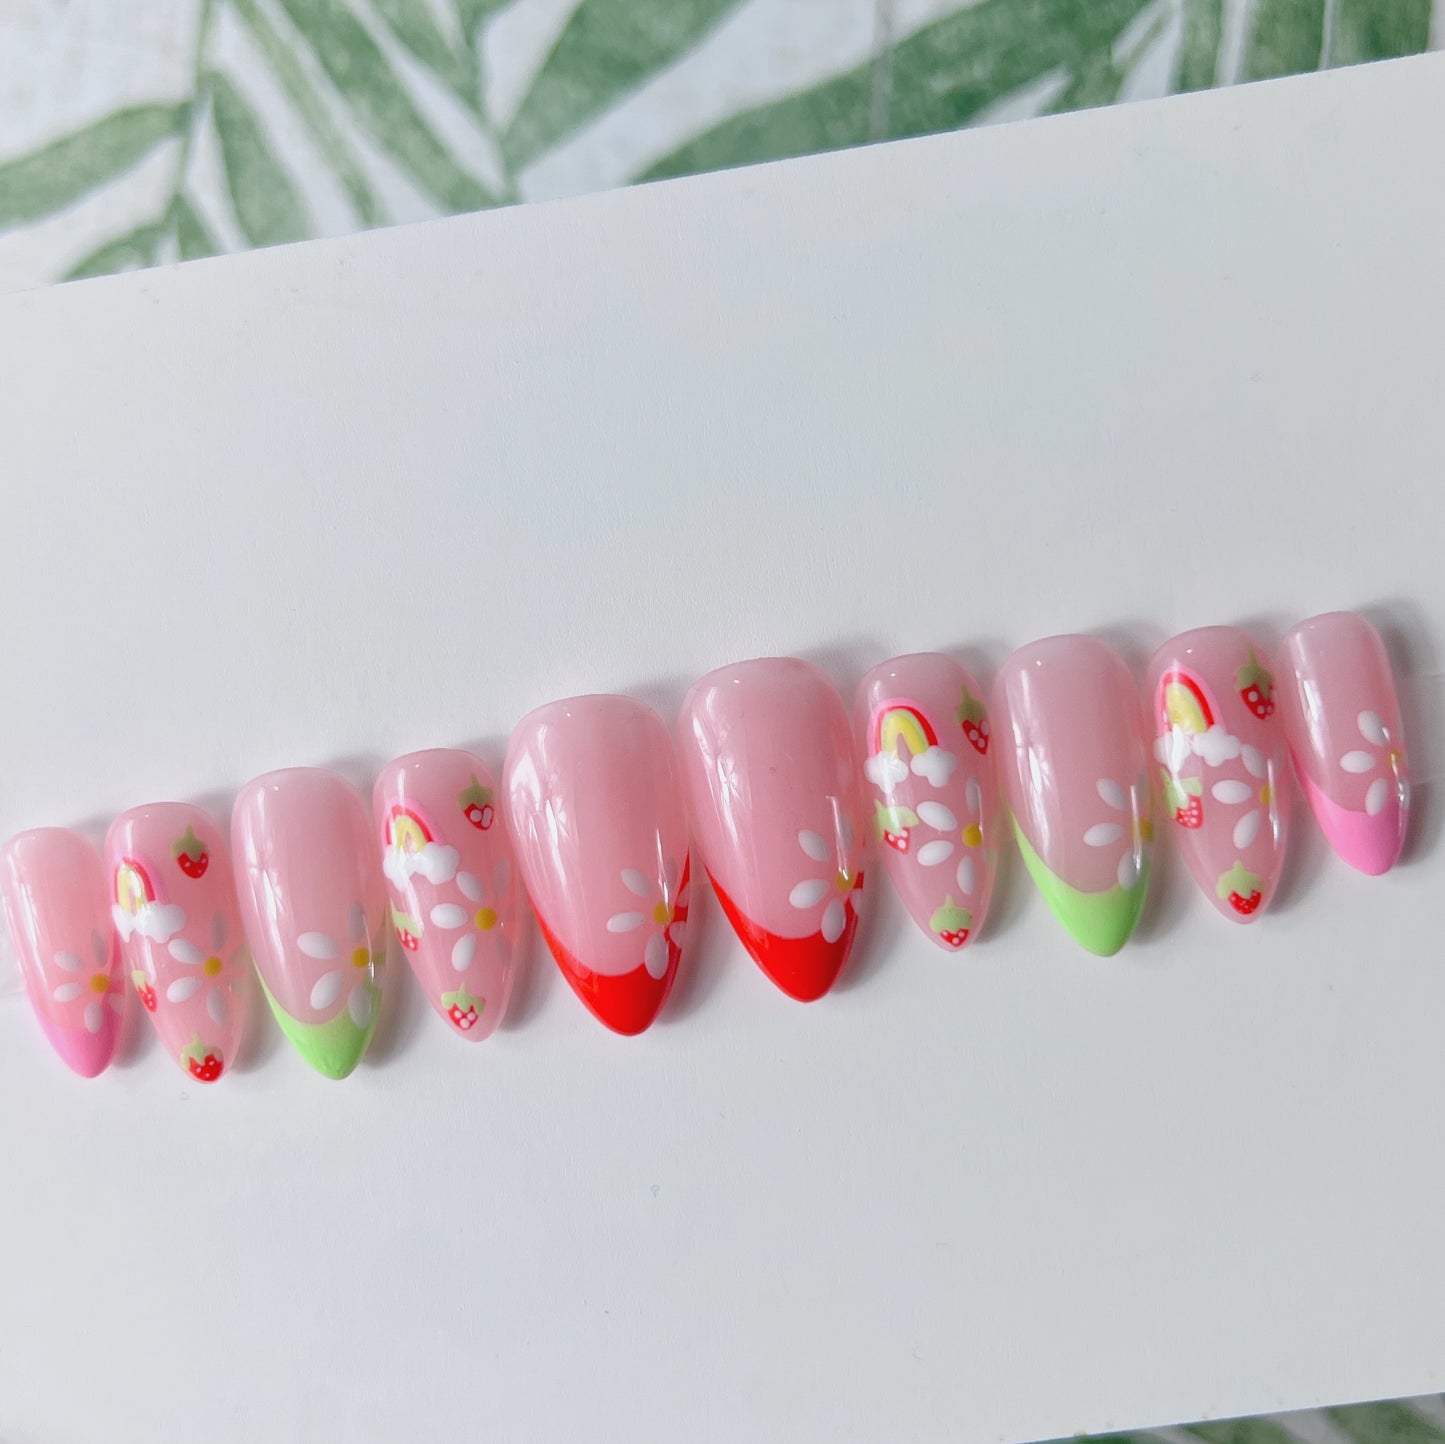 Strawberry French tip Acrylic Press on nail